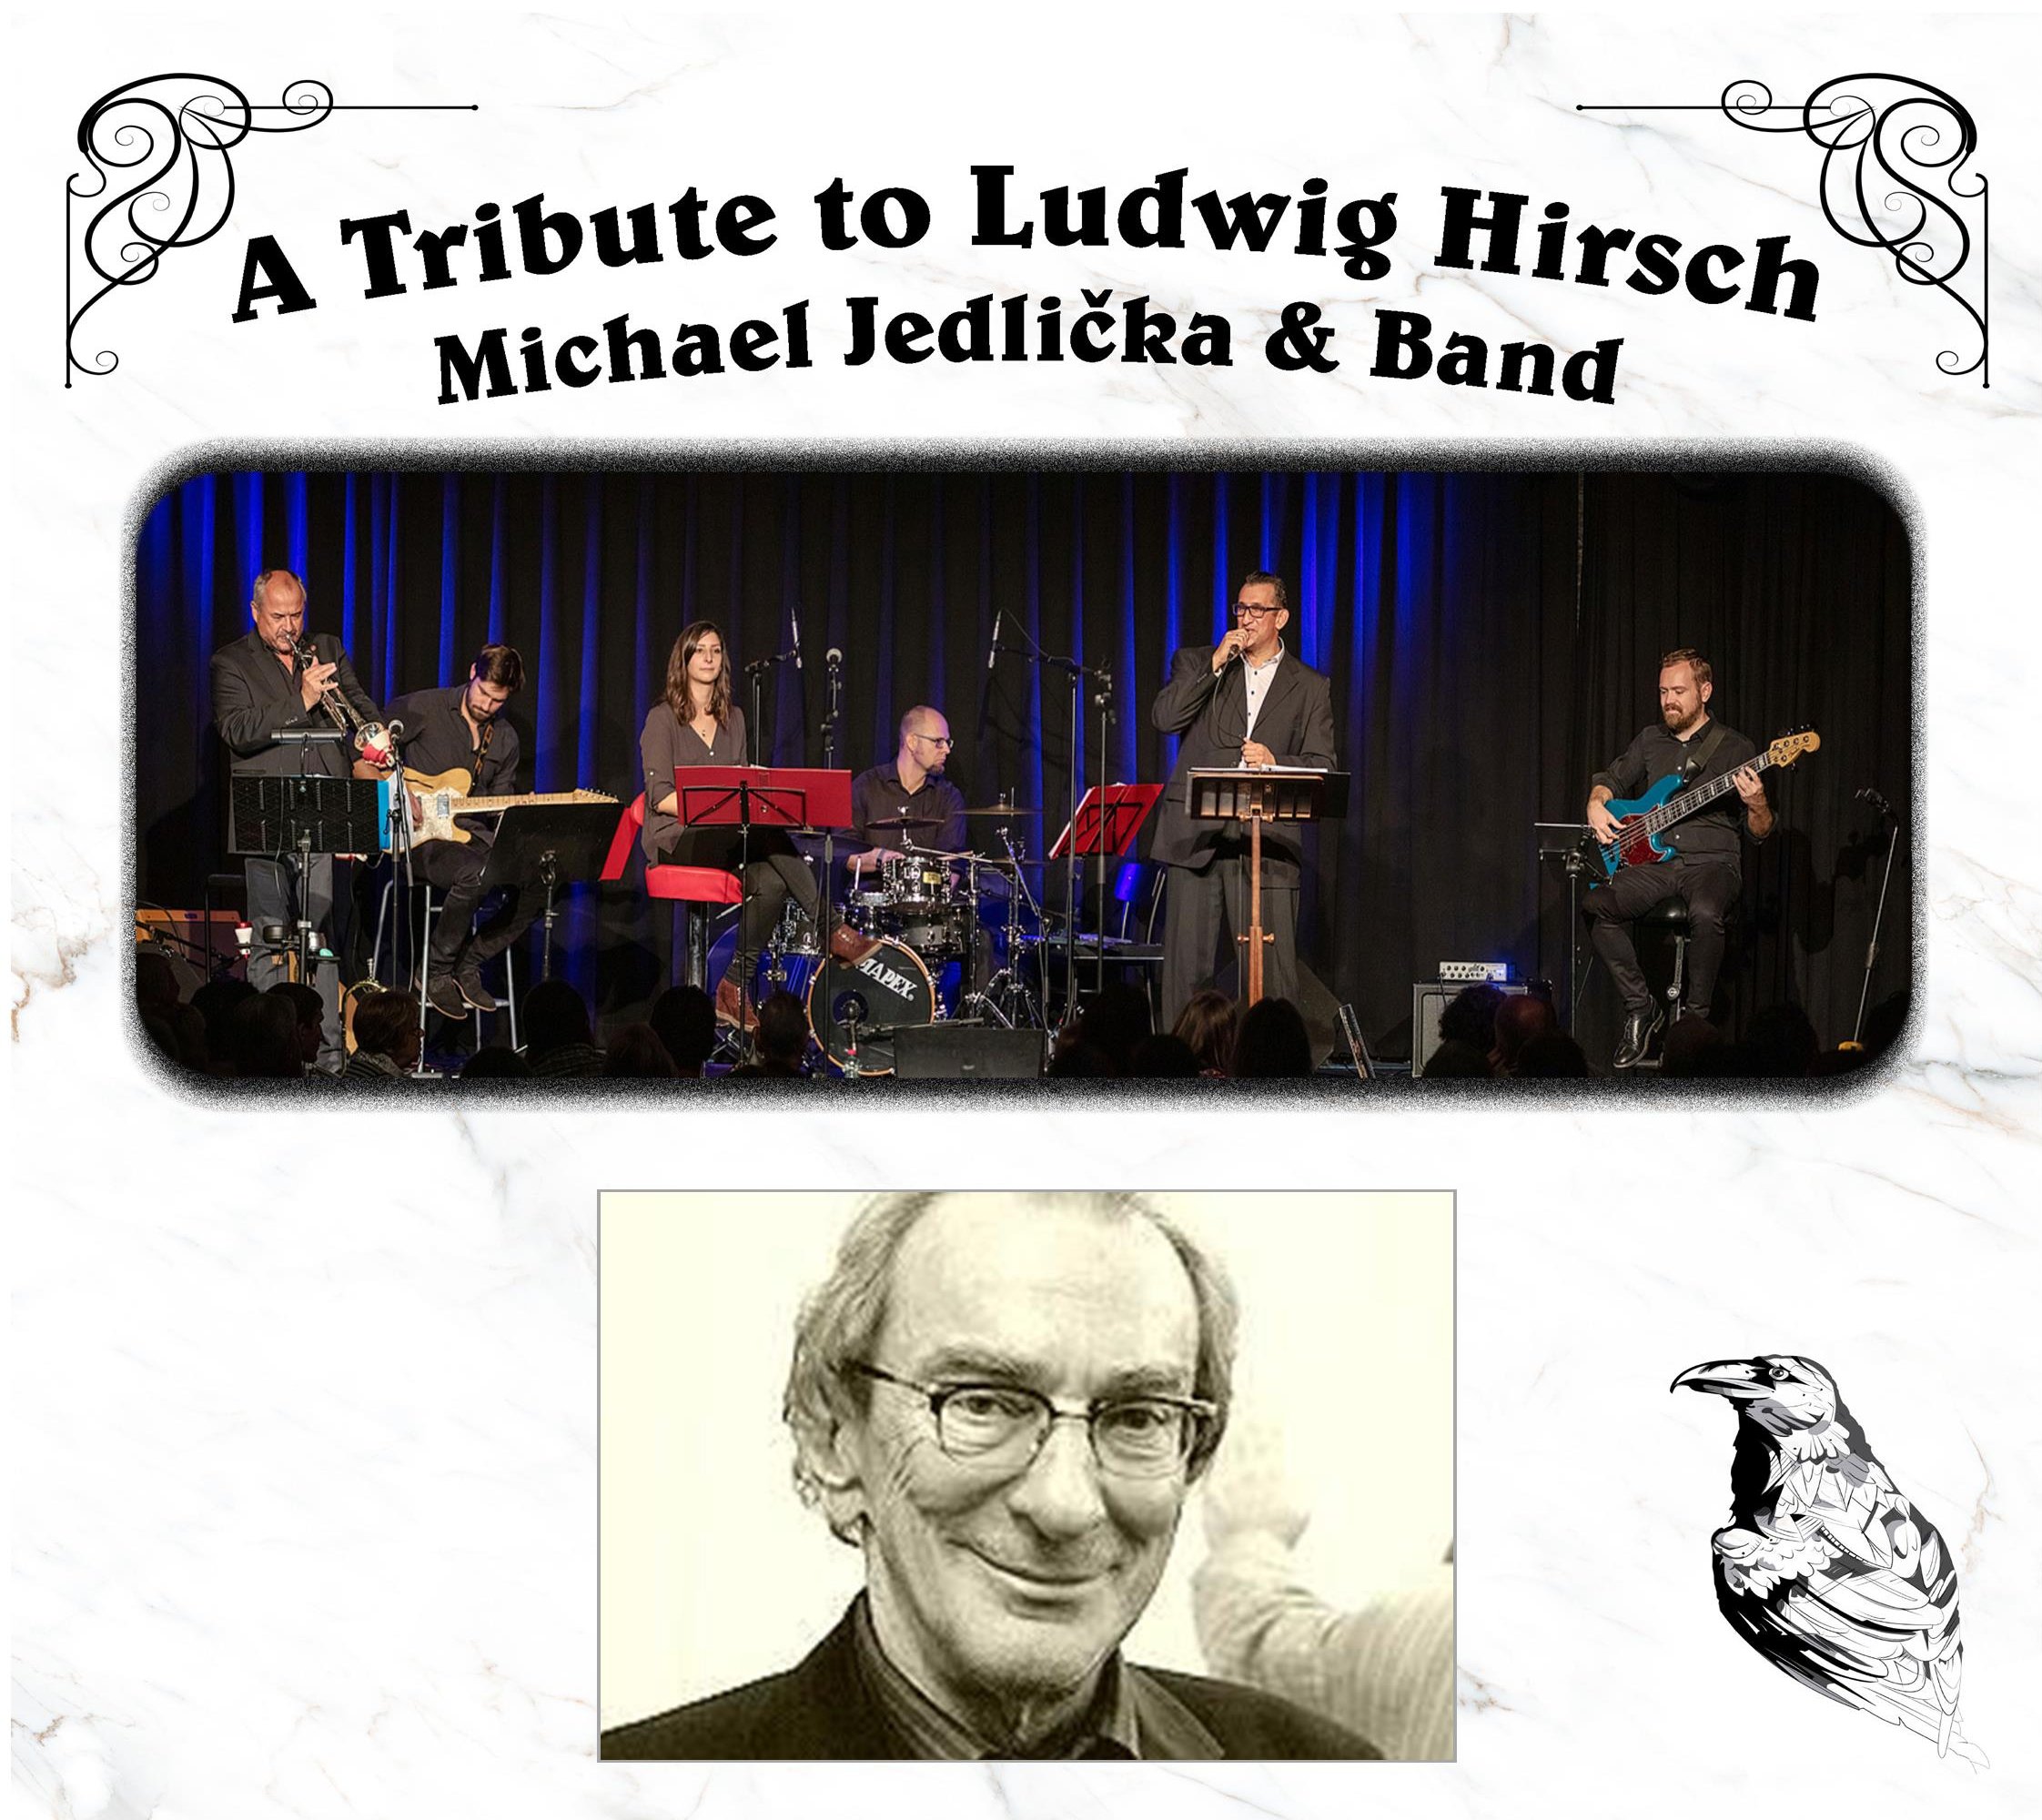 a-tribute-to-ludwig-hirsch-05-03-2022-basis-kultur